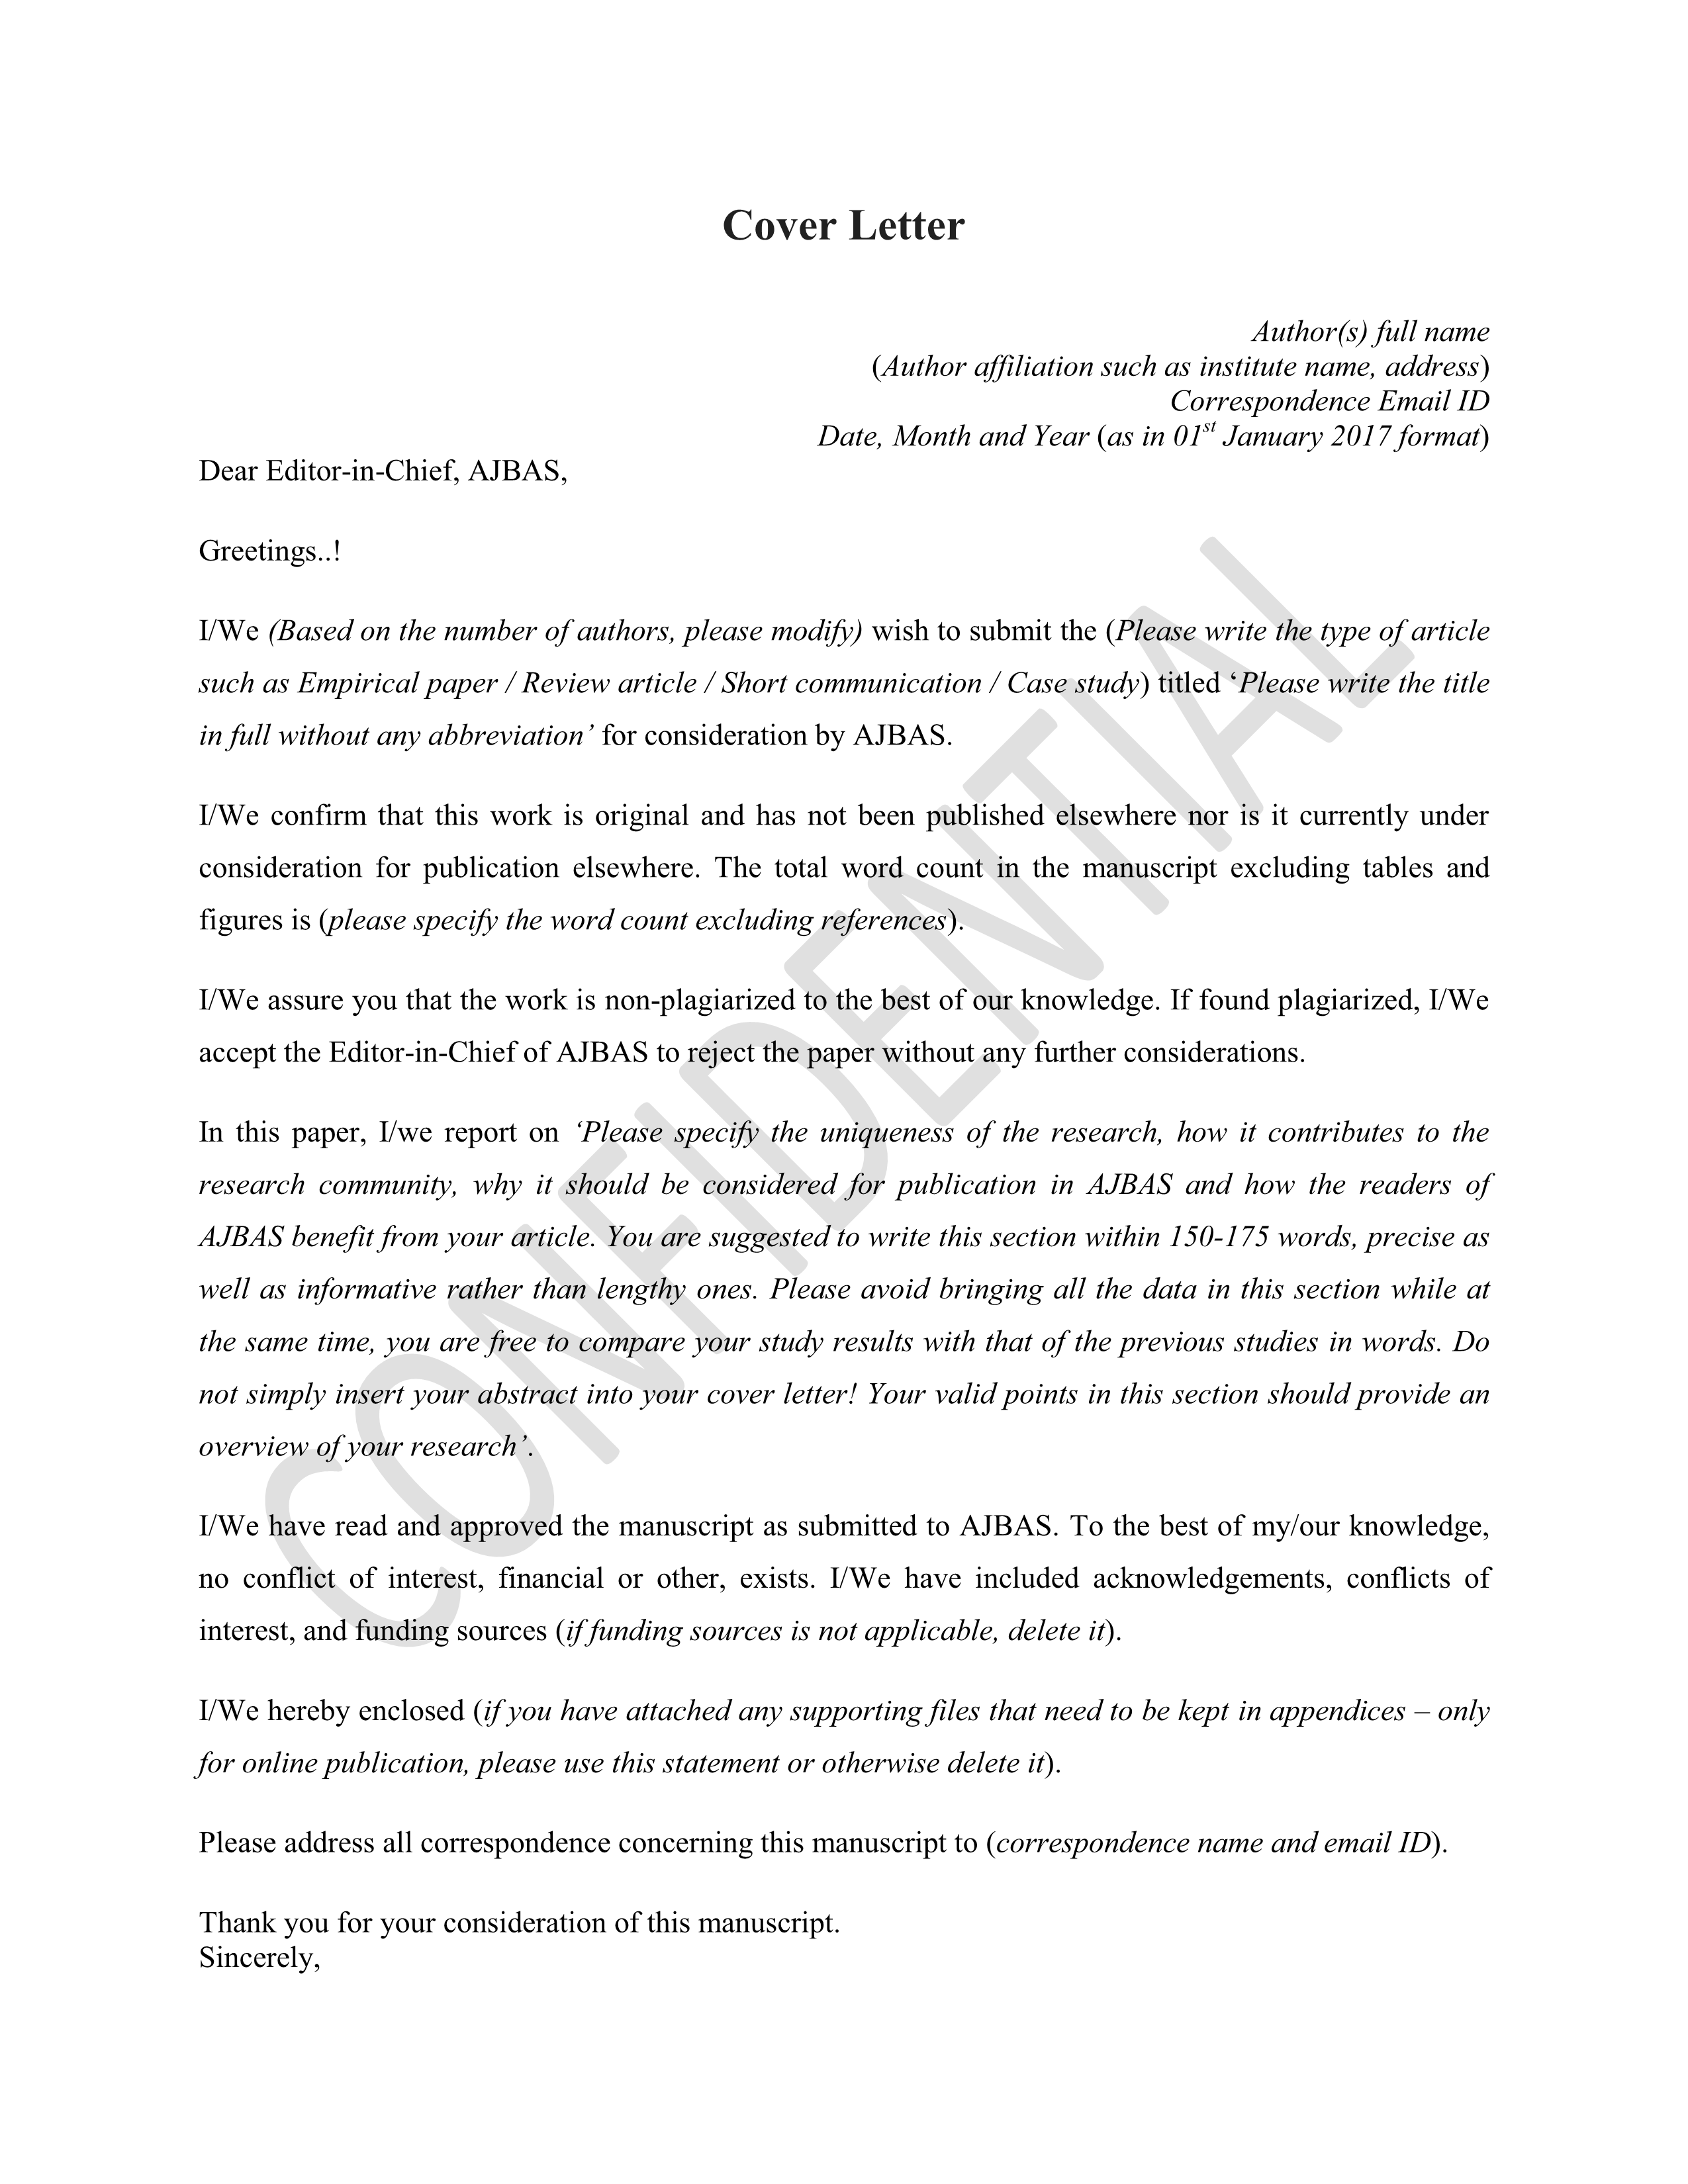 AJBAS Cover Letter Template 2